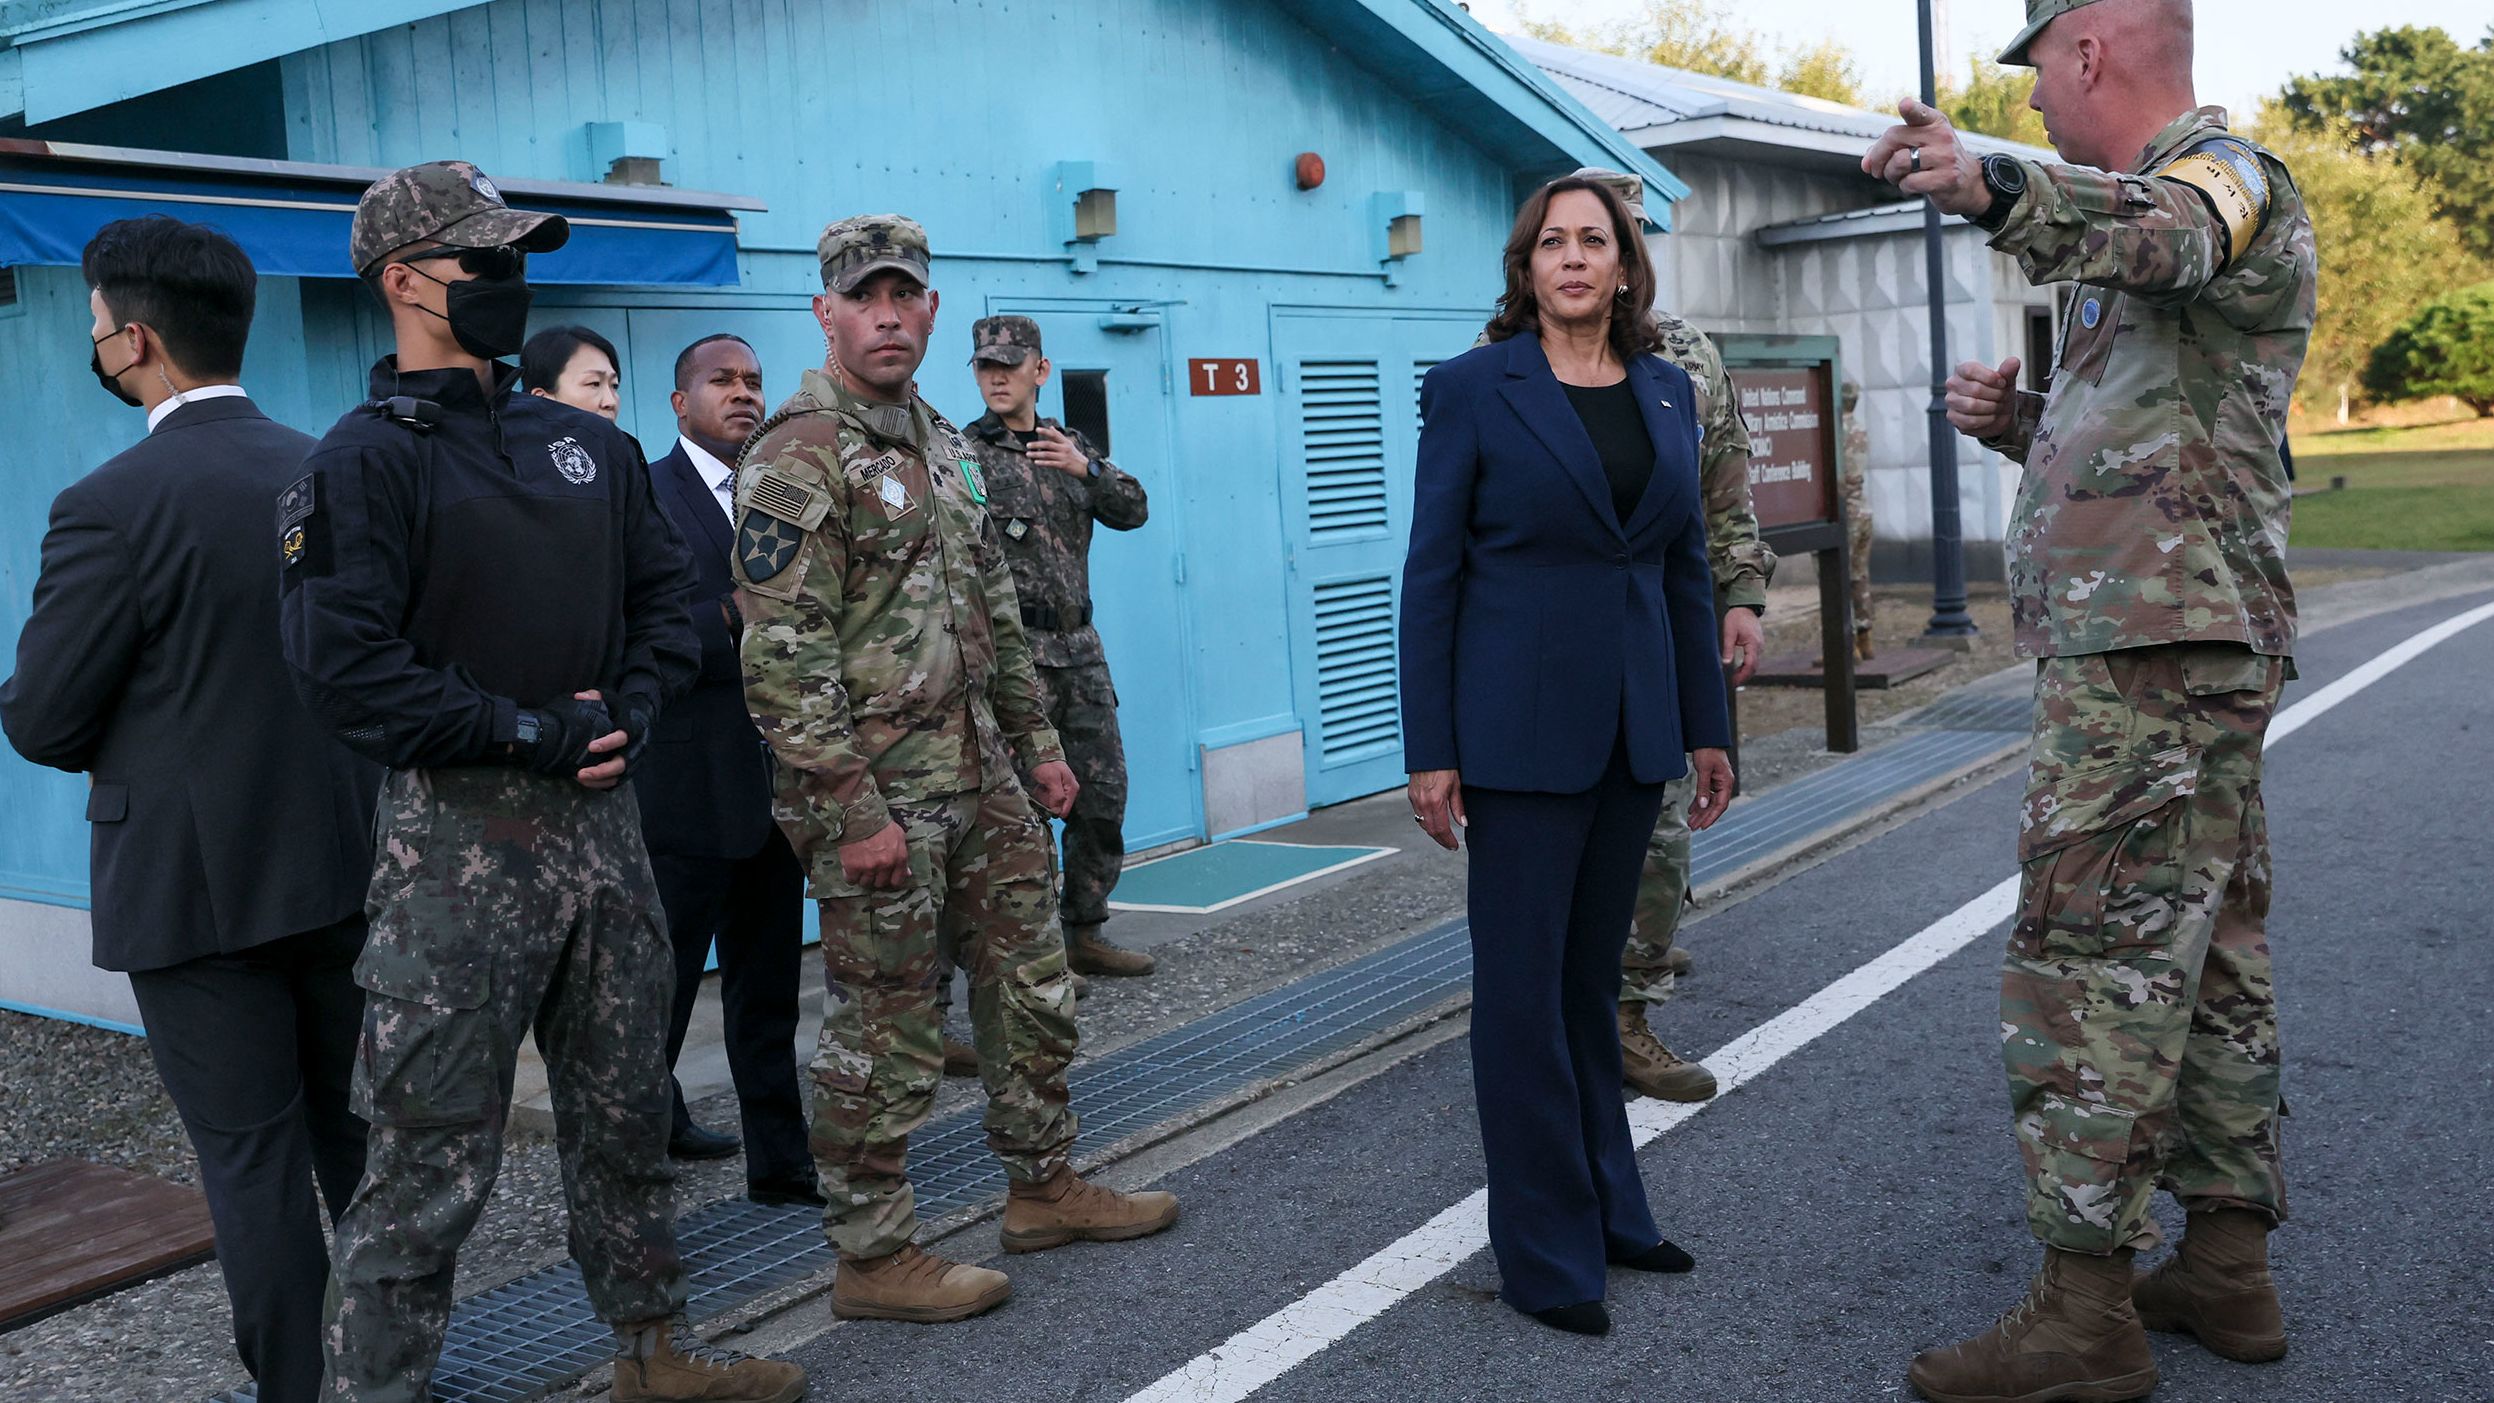 US Vice President Kamala Harris is given a tour near the demarcation line as she <a href="https://www.cnn.com/2022/09/29/asia/kamala-harris-dmz-korea-missile-launch-intl-hnk" target="_blank">visited the Demilitarized Zone</a> dividing North and South Korea on Thursday, September 29. It was the last stop on her four-day trip to Asia, and it came a day after Pyongyang fired two ballistic missiles into the waters off its east coast.